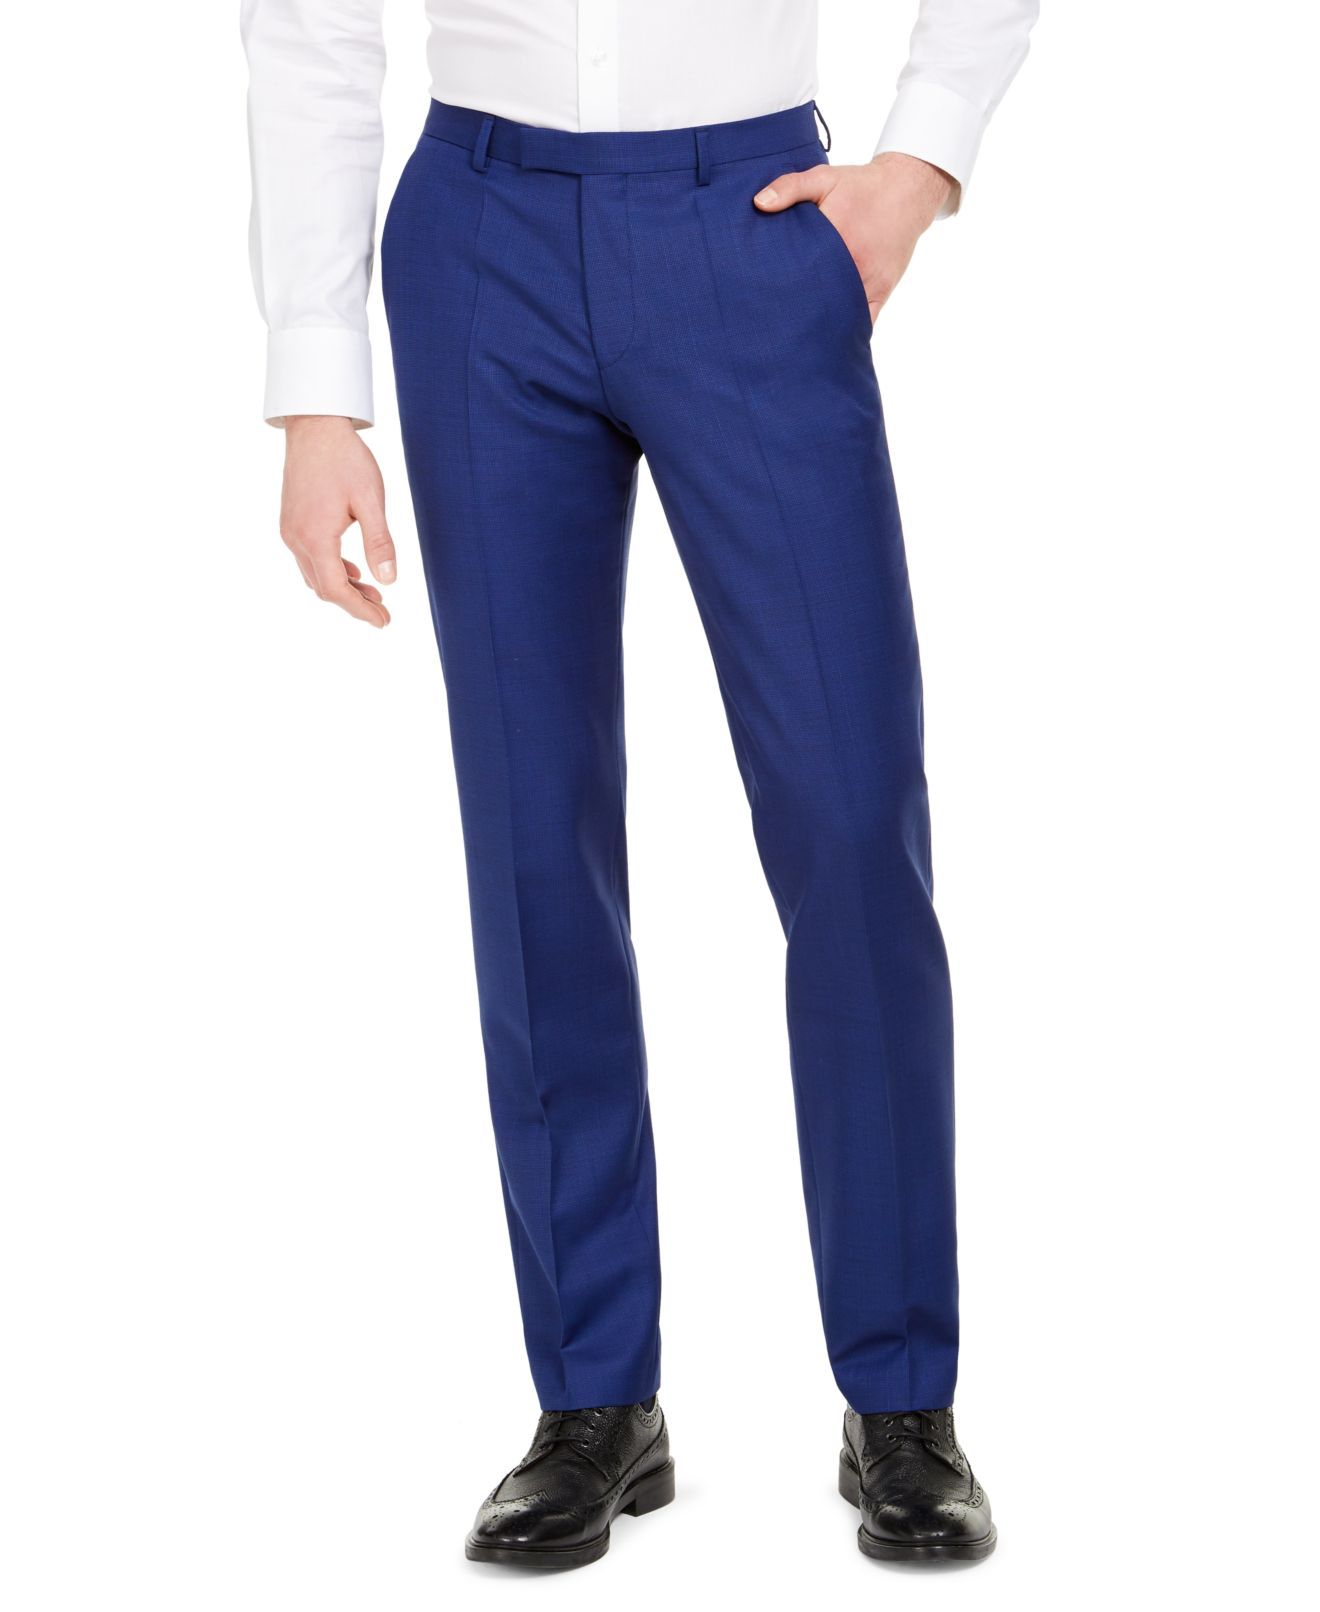 Color: Blues Size Type: Regular Bottoms Size (Men's): 34 Inseam: 32 Type: Pants Style: Dress Pants Occasion: Formal Material: Wool Blends